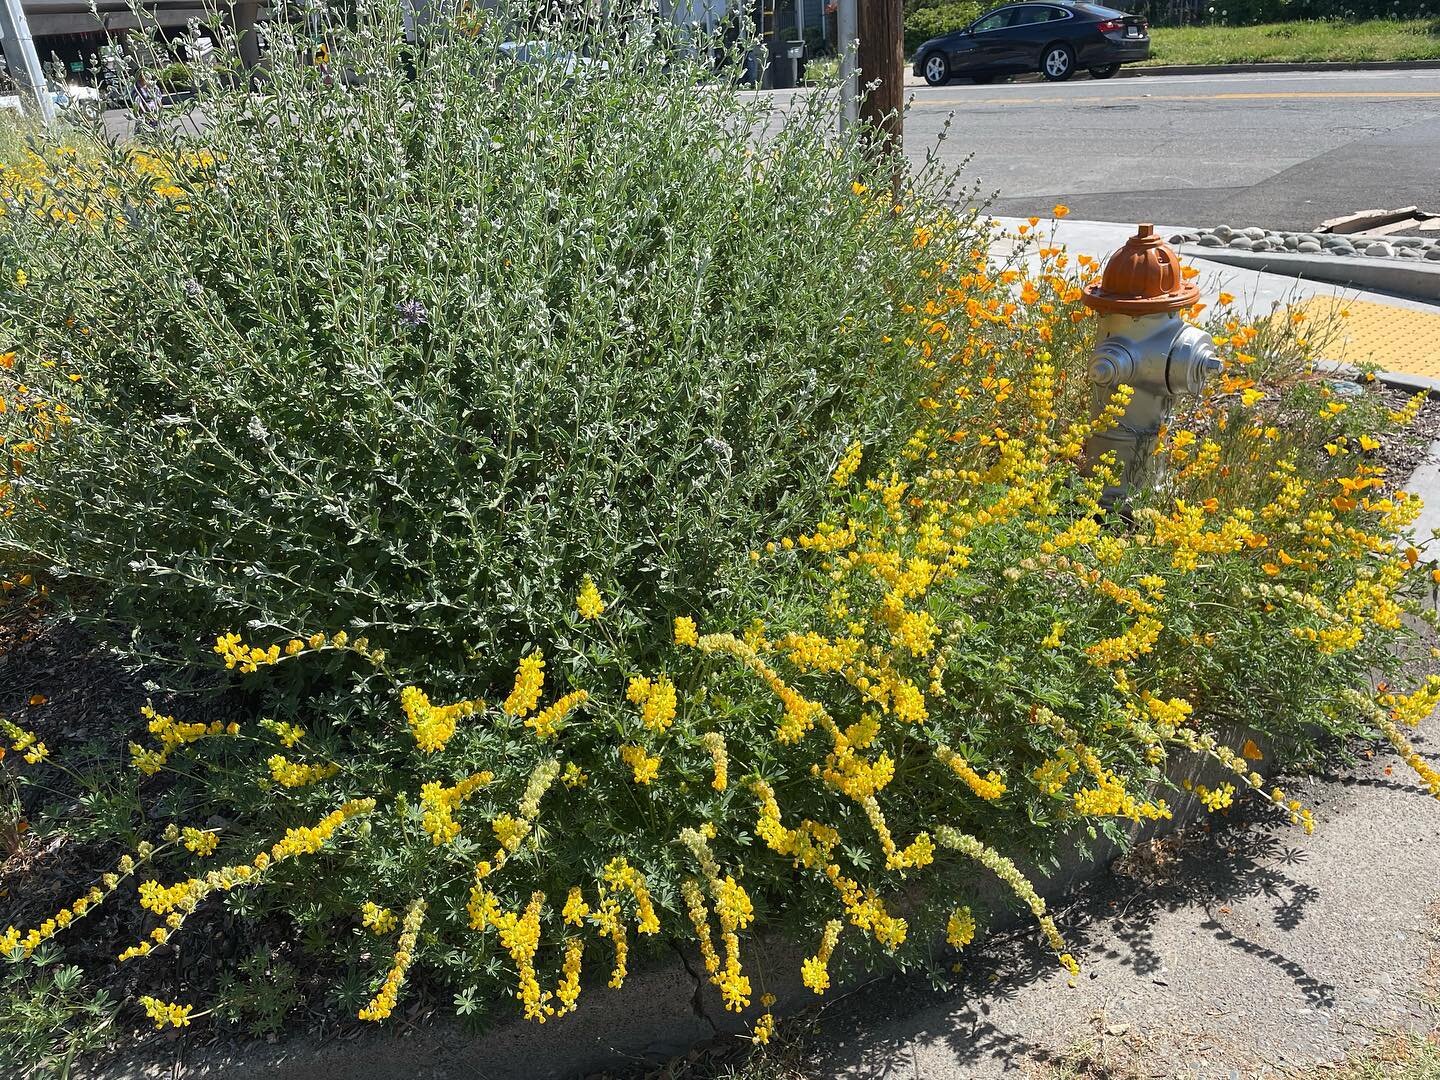 Want to come help us out at our volunteer site and take home some wildflower seeds? We need help weeding on Saturday, May 13 at the corner of Truckee Way and 34th St. in Oak Park. Starts at 9 am. Come out, it&rsquo;ll be fun!